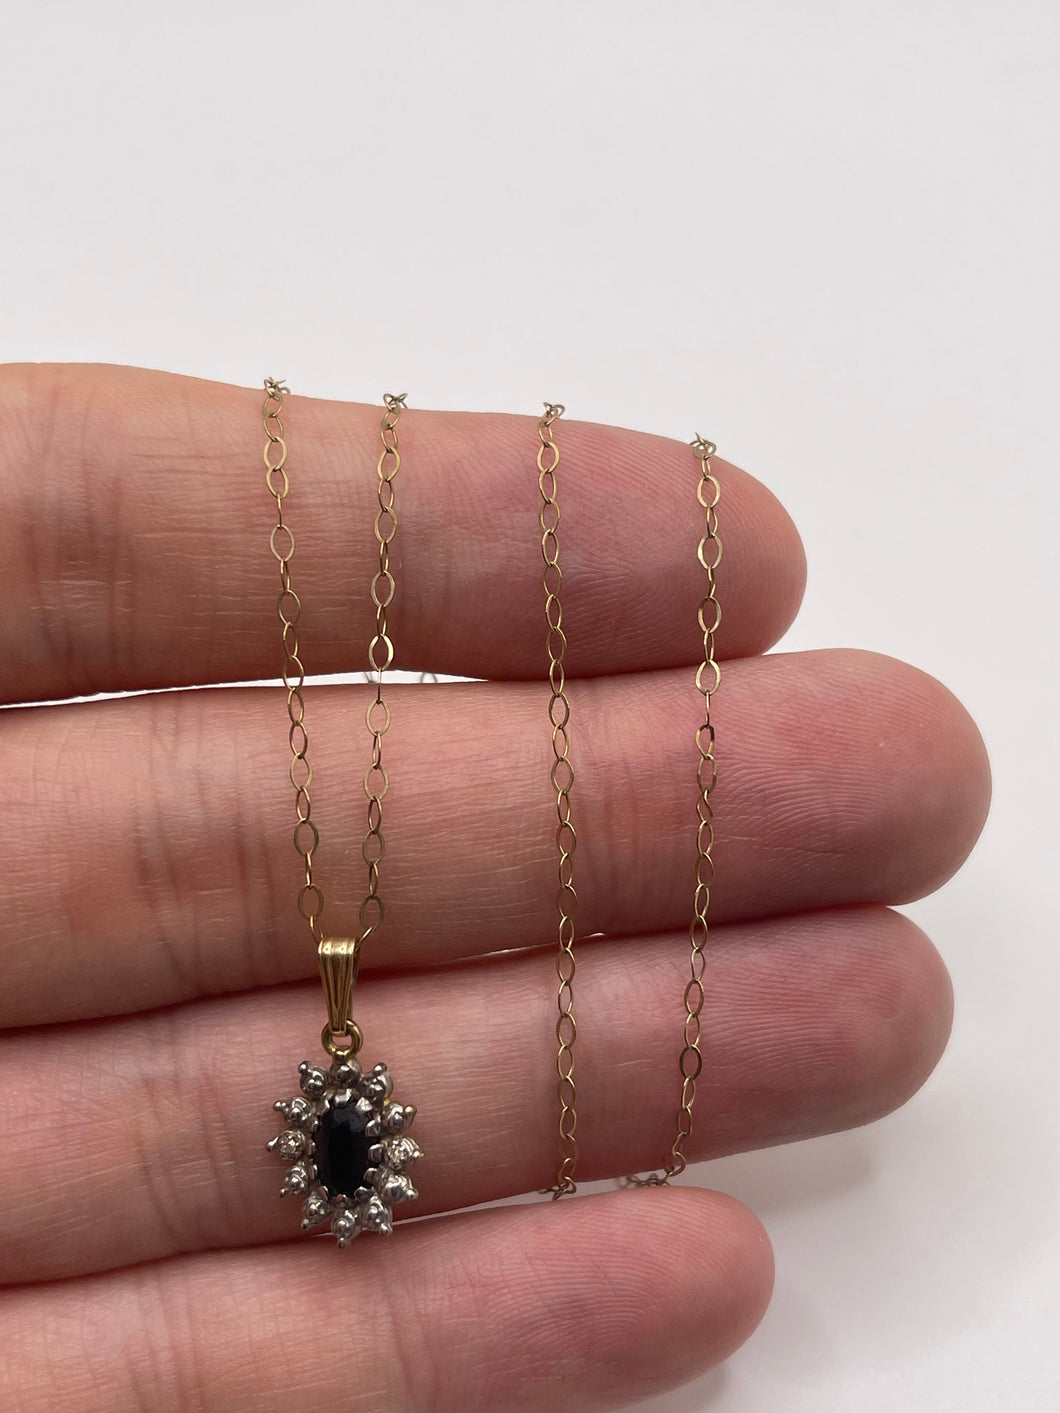 9ct gold sapphire and diamond necklace